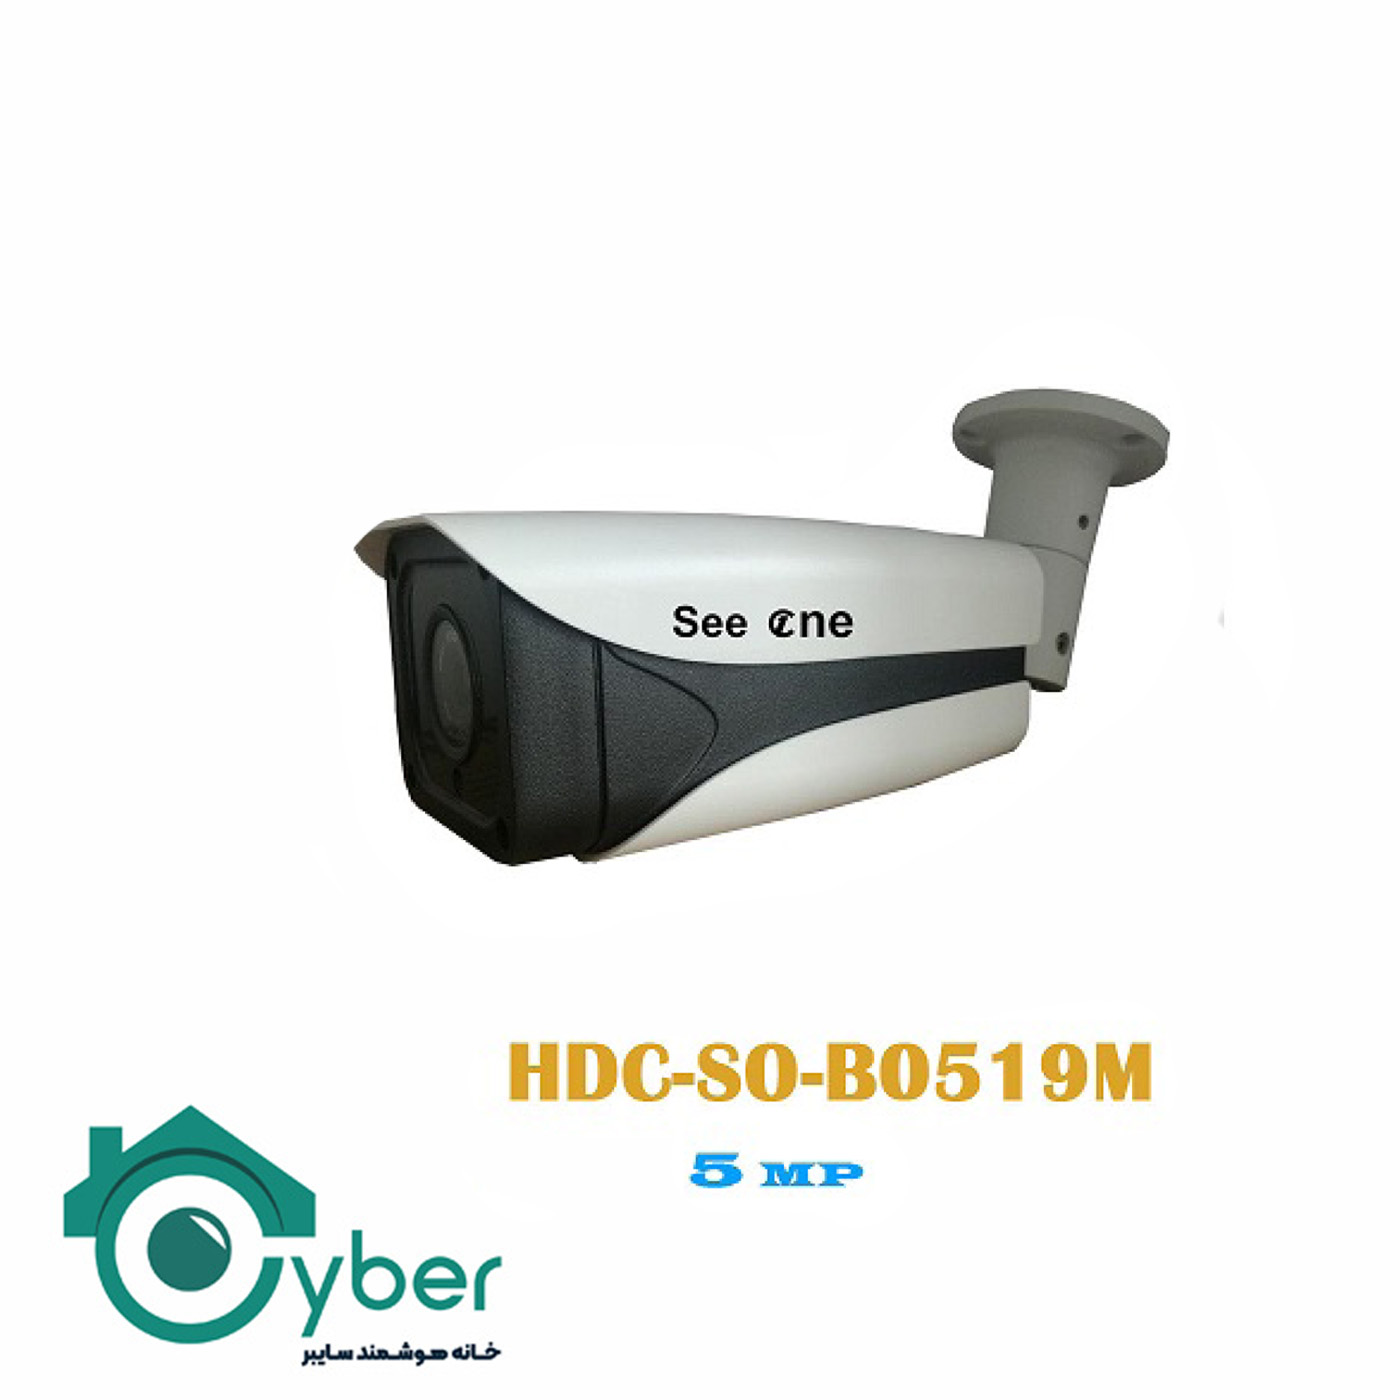 See one مدل HDC-S0-B0519M